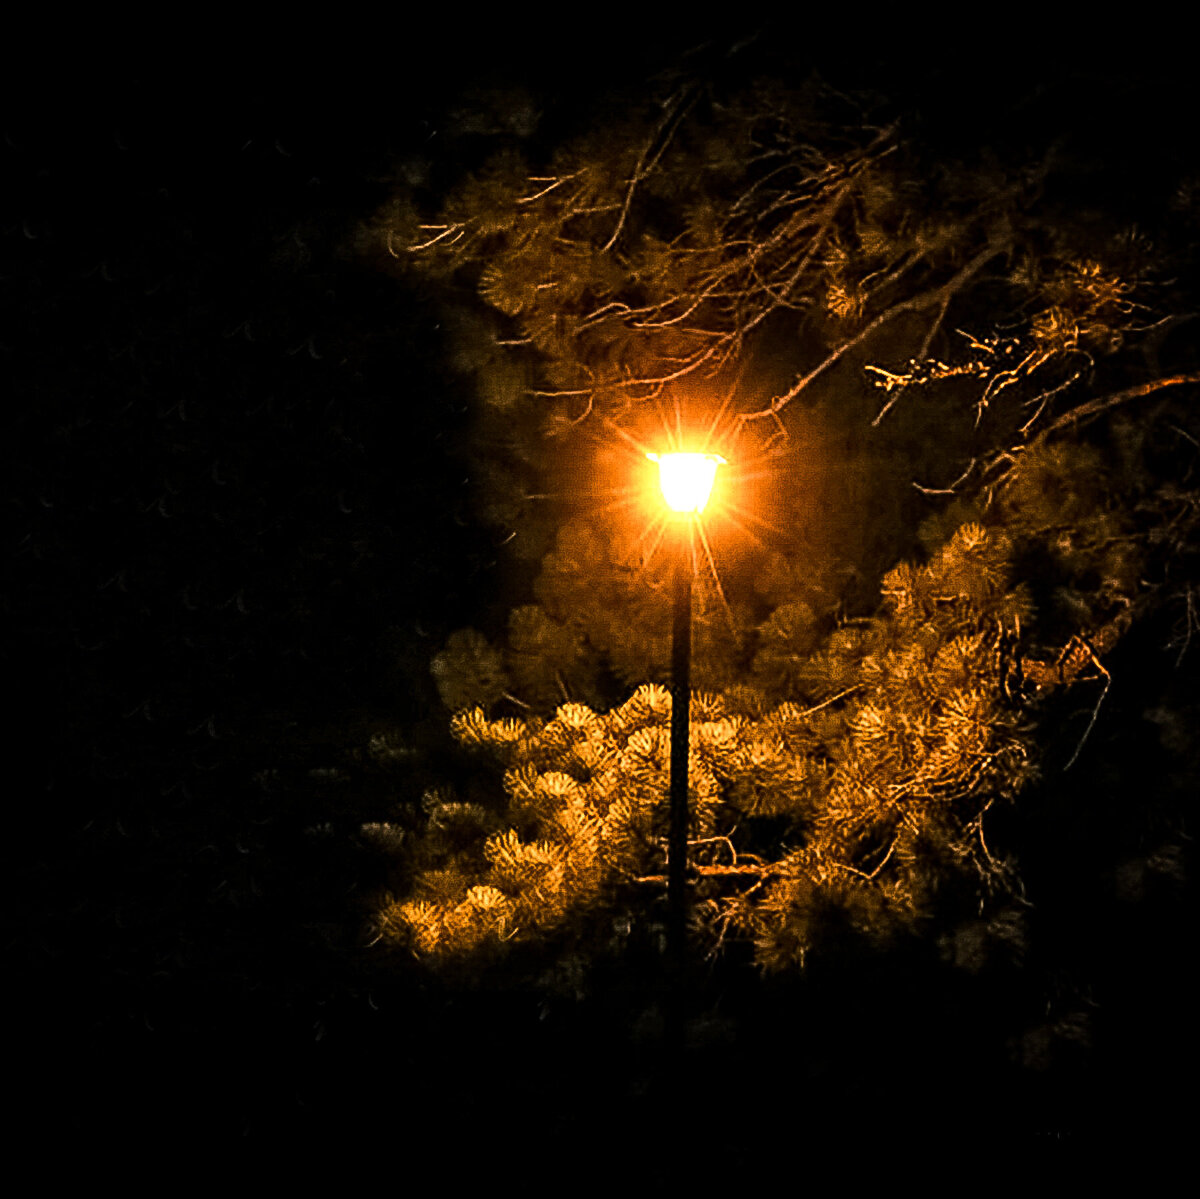 Lamplight-in-the-Woods 1-2 4x4- LES